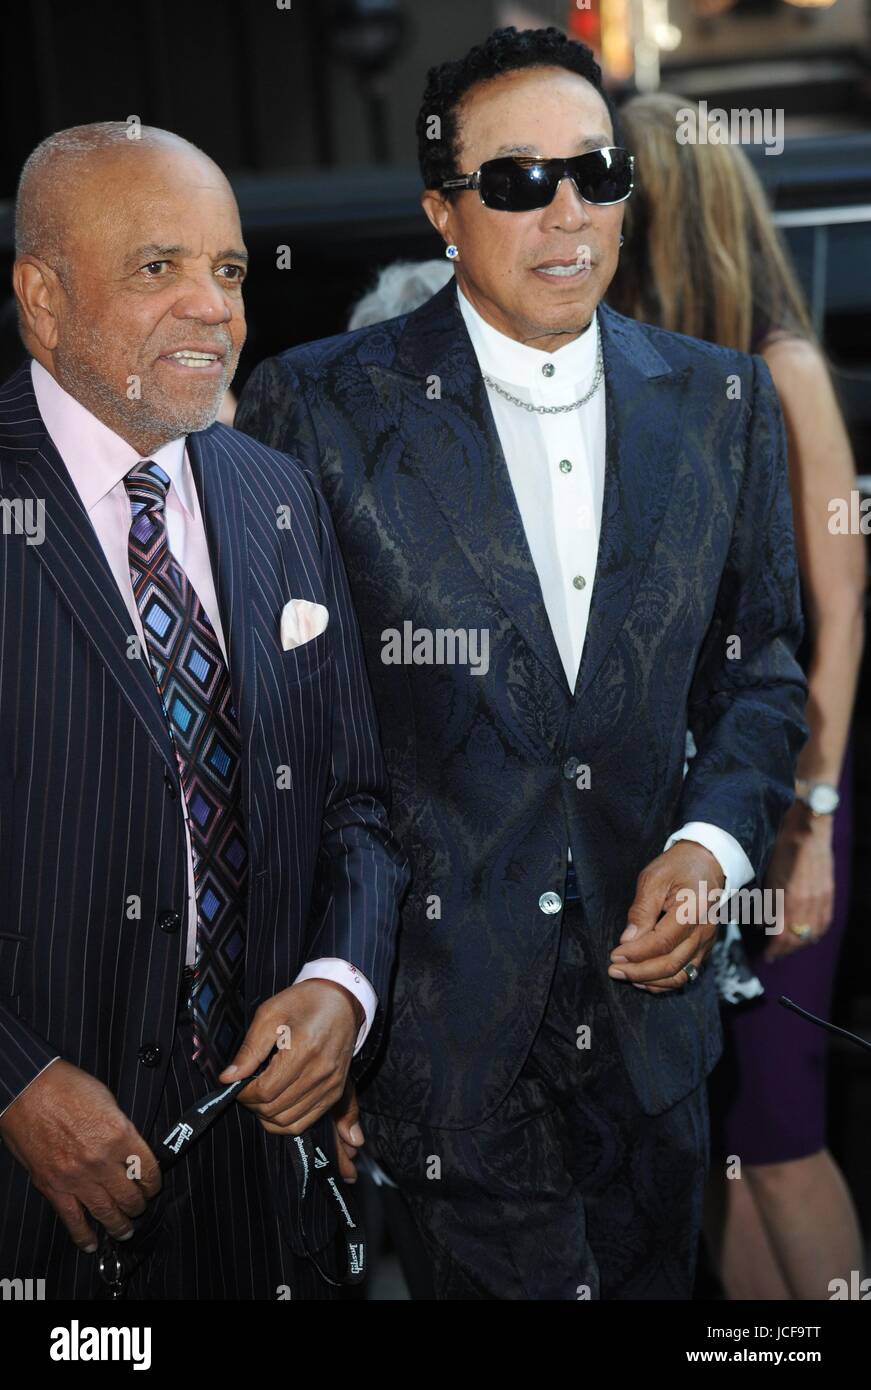 New York, NY, USA. 15th June, 2017. Berry Gordy Jr, Smokey Robinson at arrivals for Songwriters Hall Of Fame 2017 48th Annual Induction And Awards Gala, New York Marriott Marquis, New York, NY June 15, 2017. Credit: Kristin Callahan/Everett Collection/Alamy Live News Stock Photo